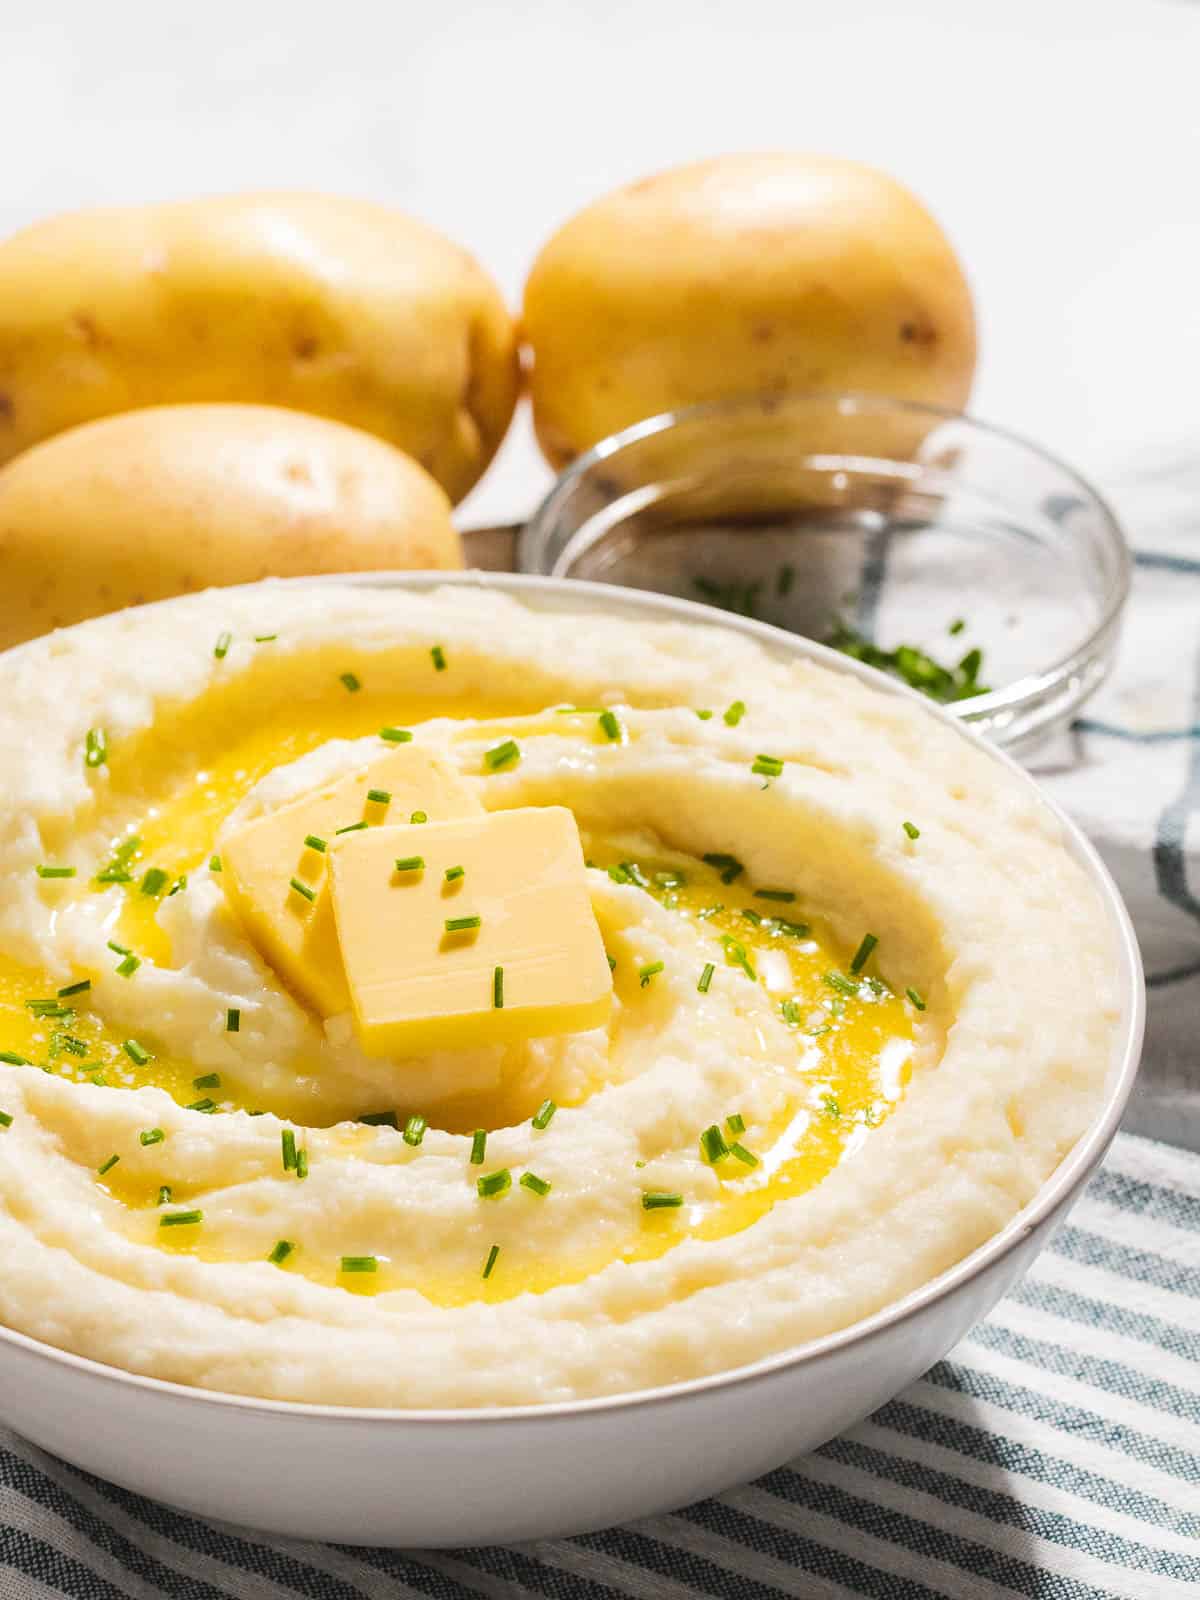 Yukon gold mashed potatoes with sour cream and chives.